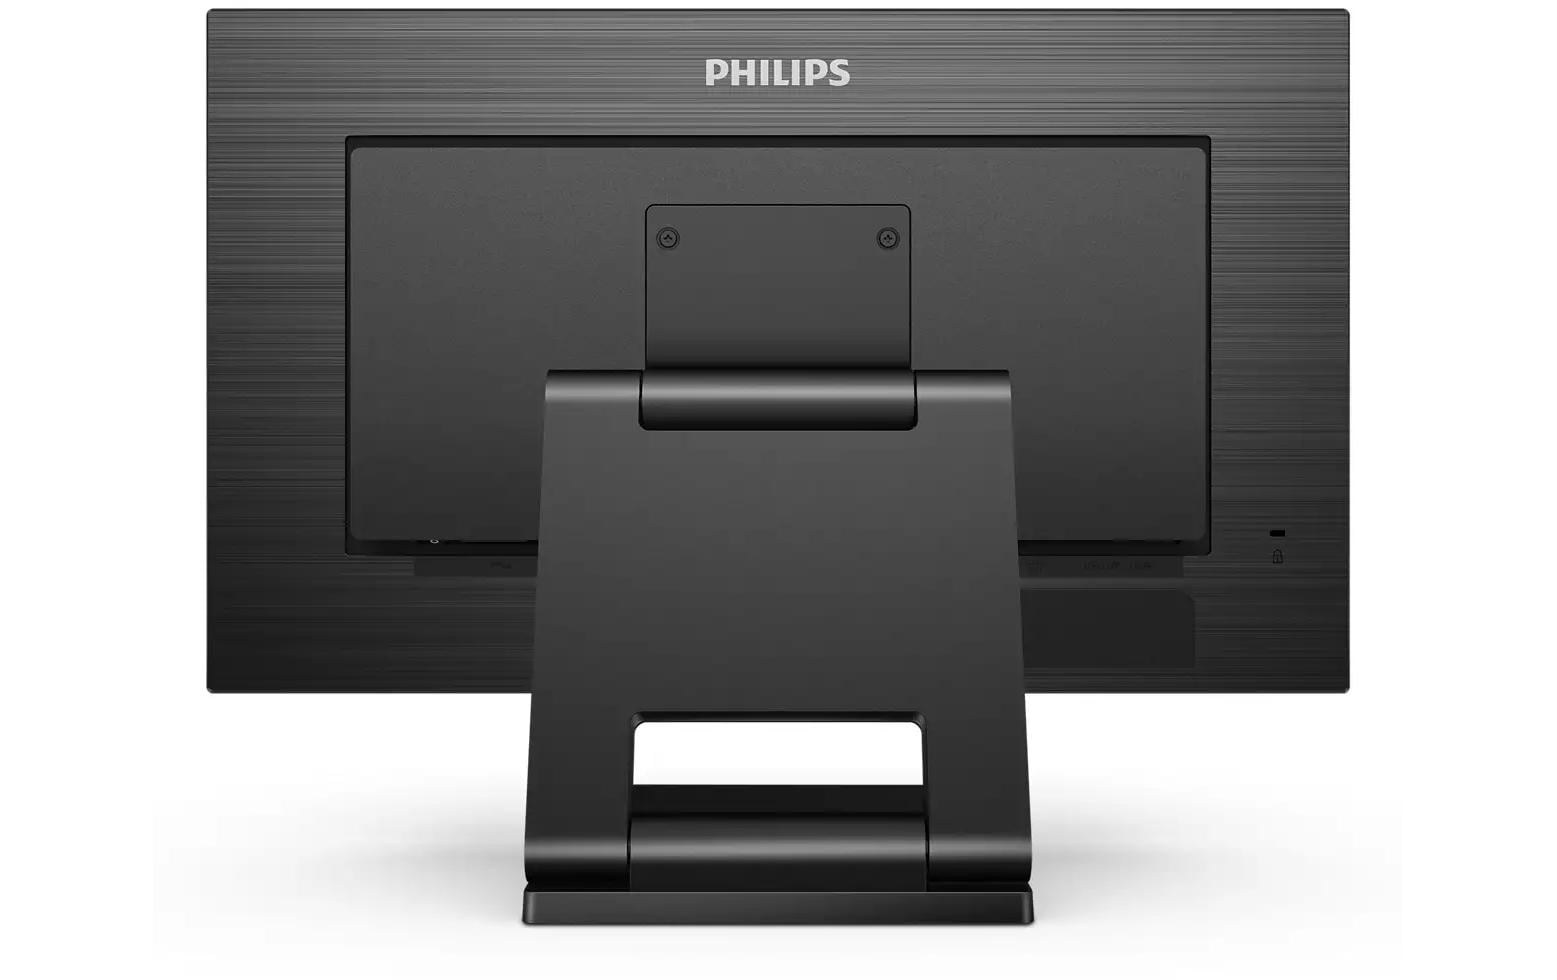 Philips LED-Monitor »Touch«, 60,45 cm/23,8 Zoll, 1920 x 1080 px, 75 Hz